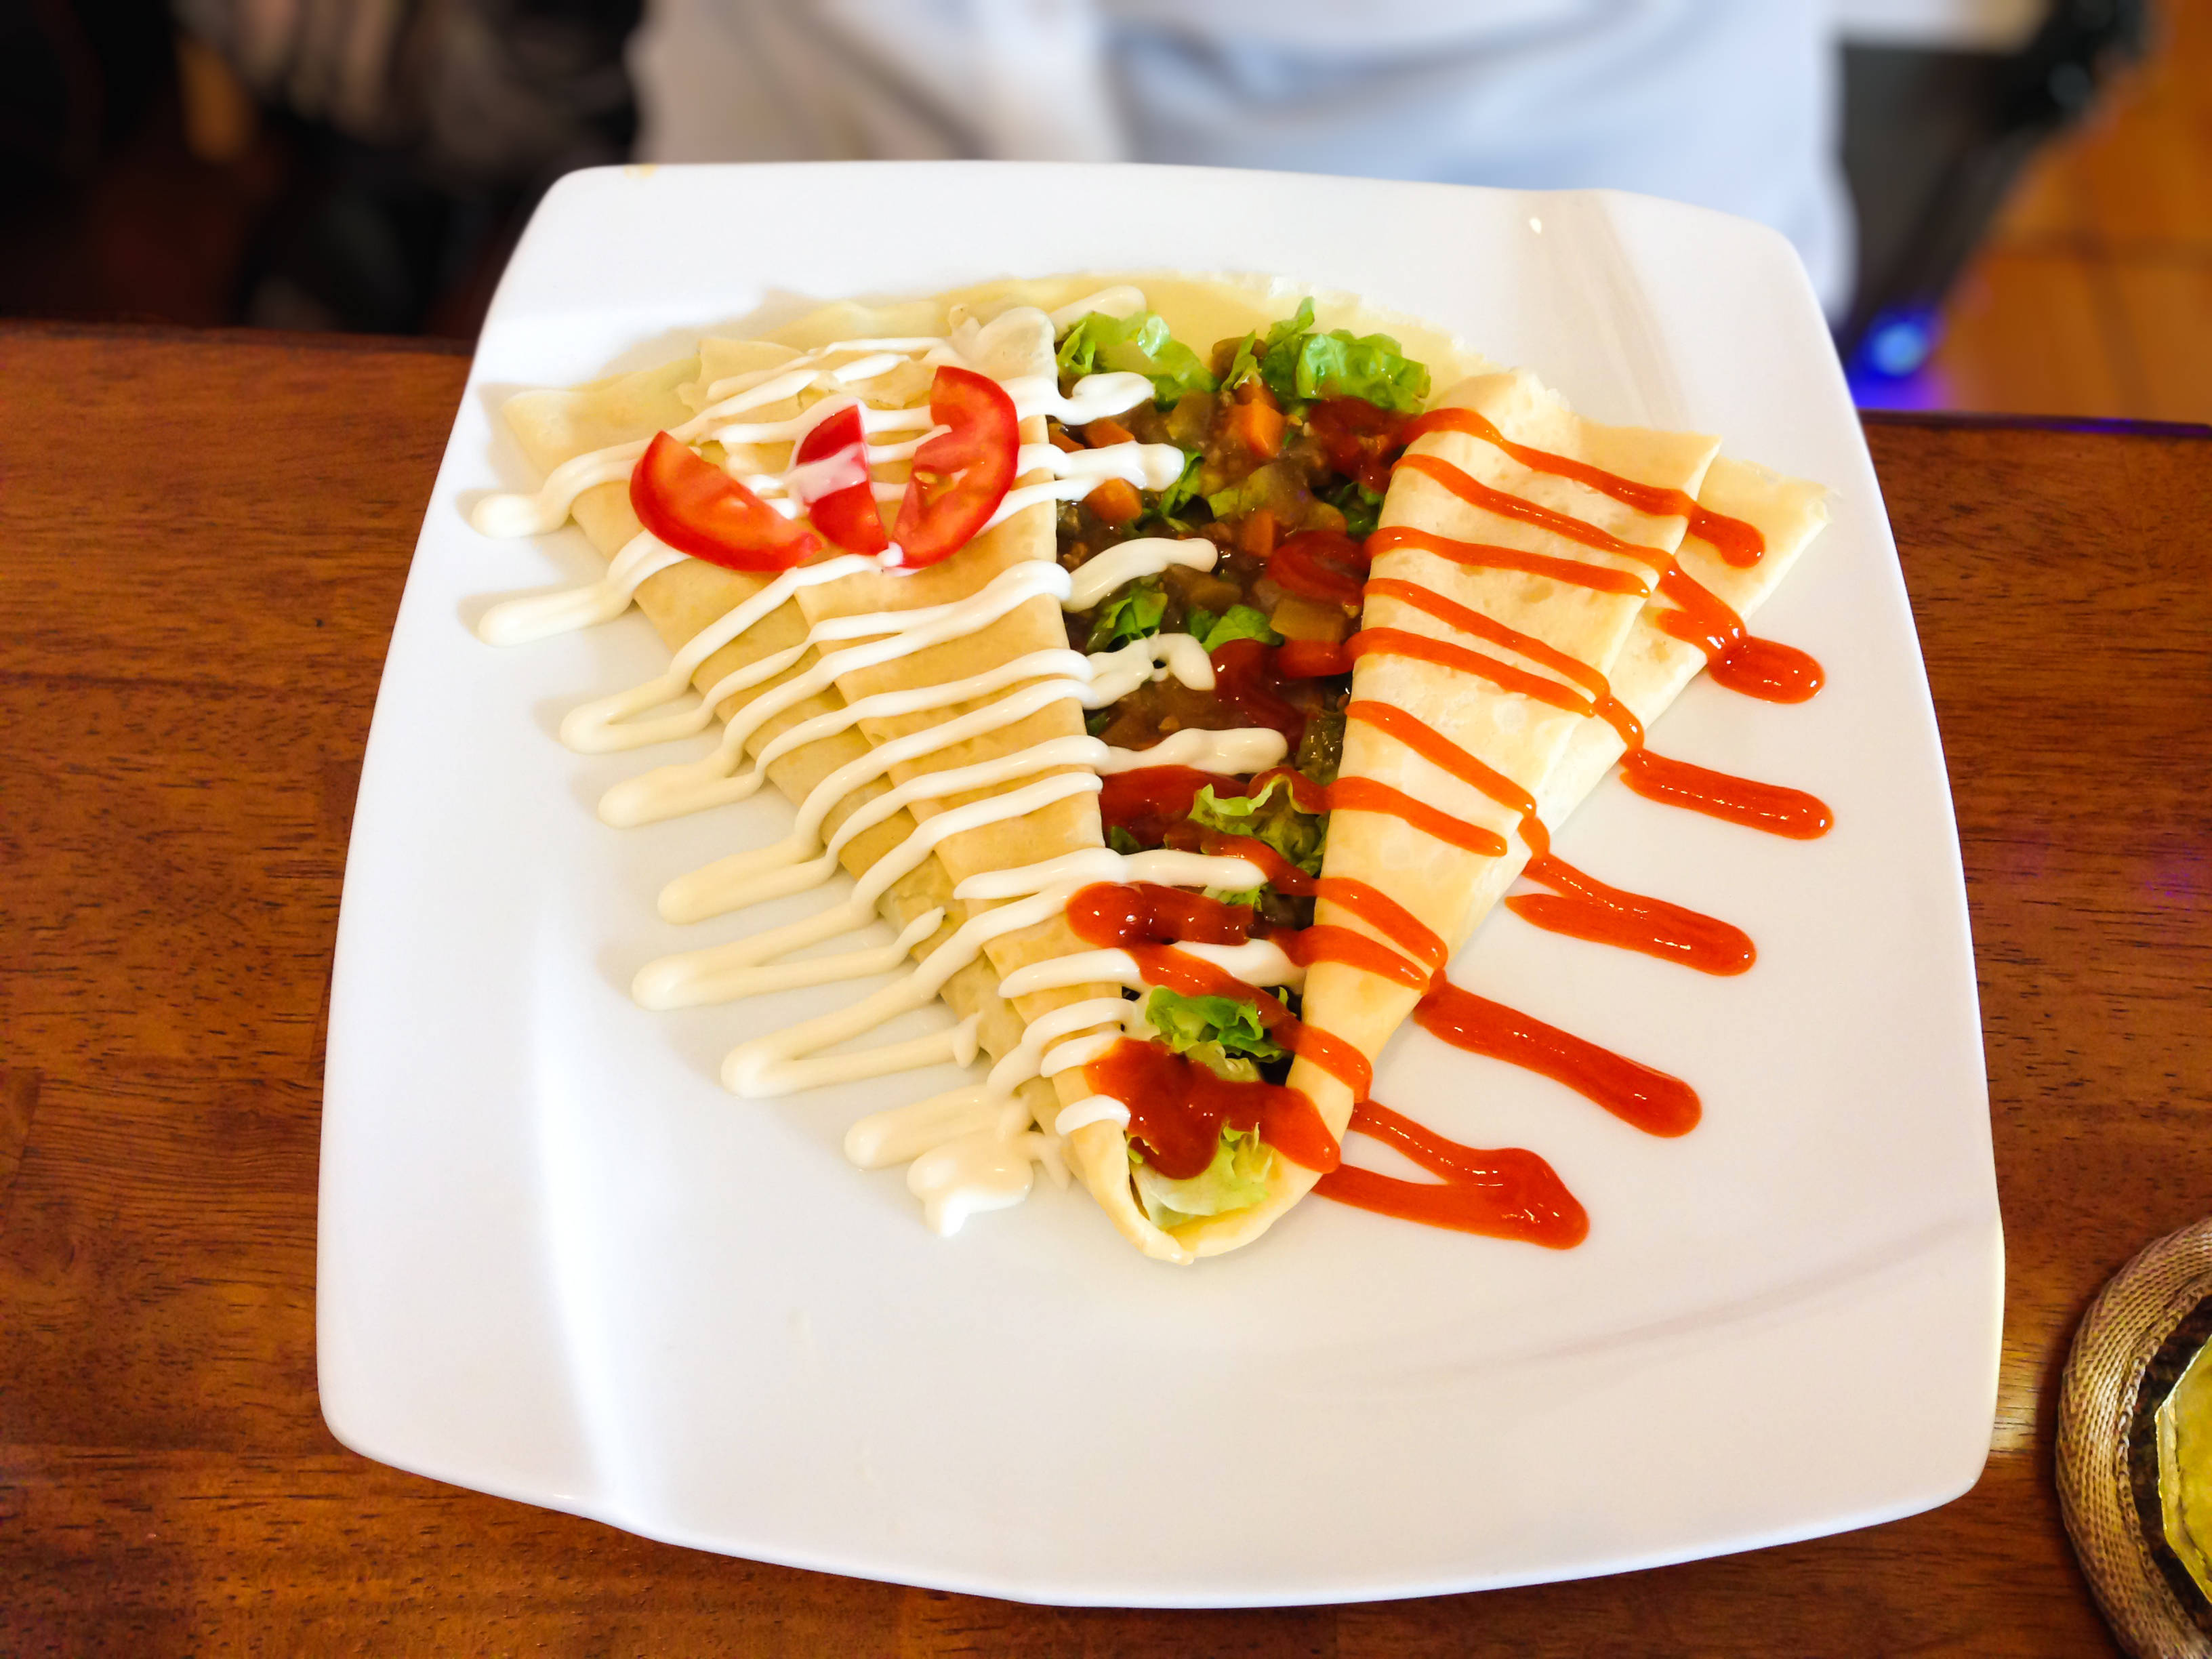 Japanese curry crepe